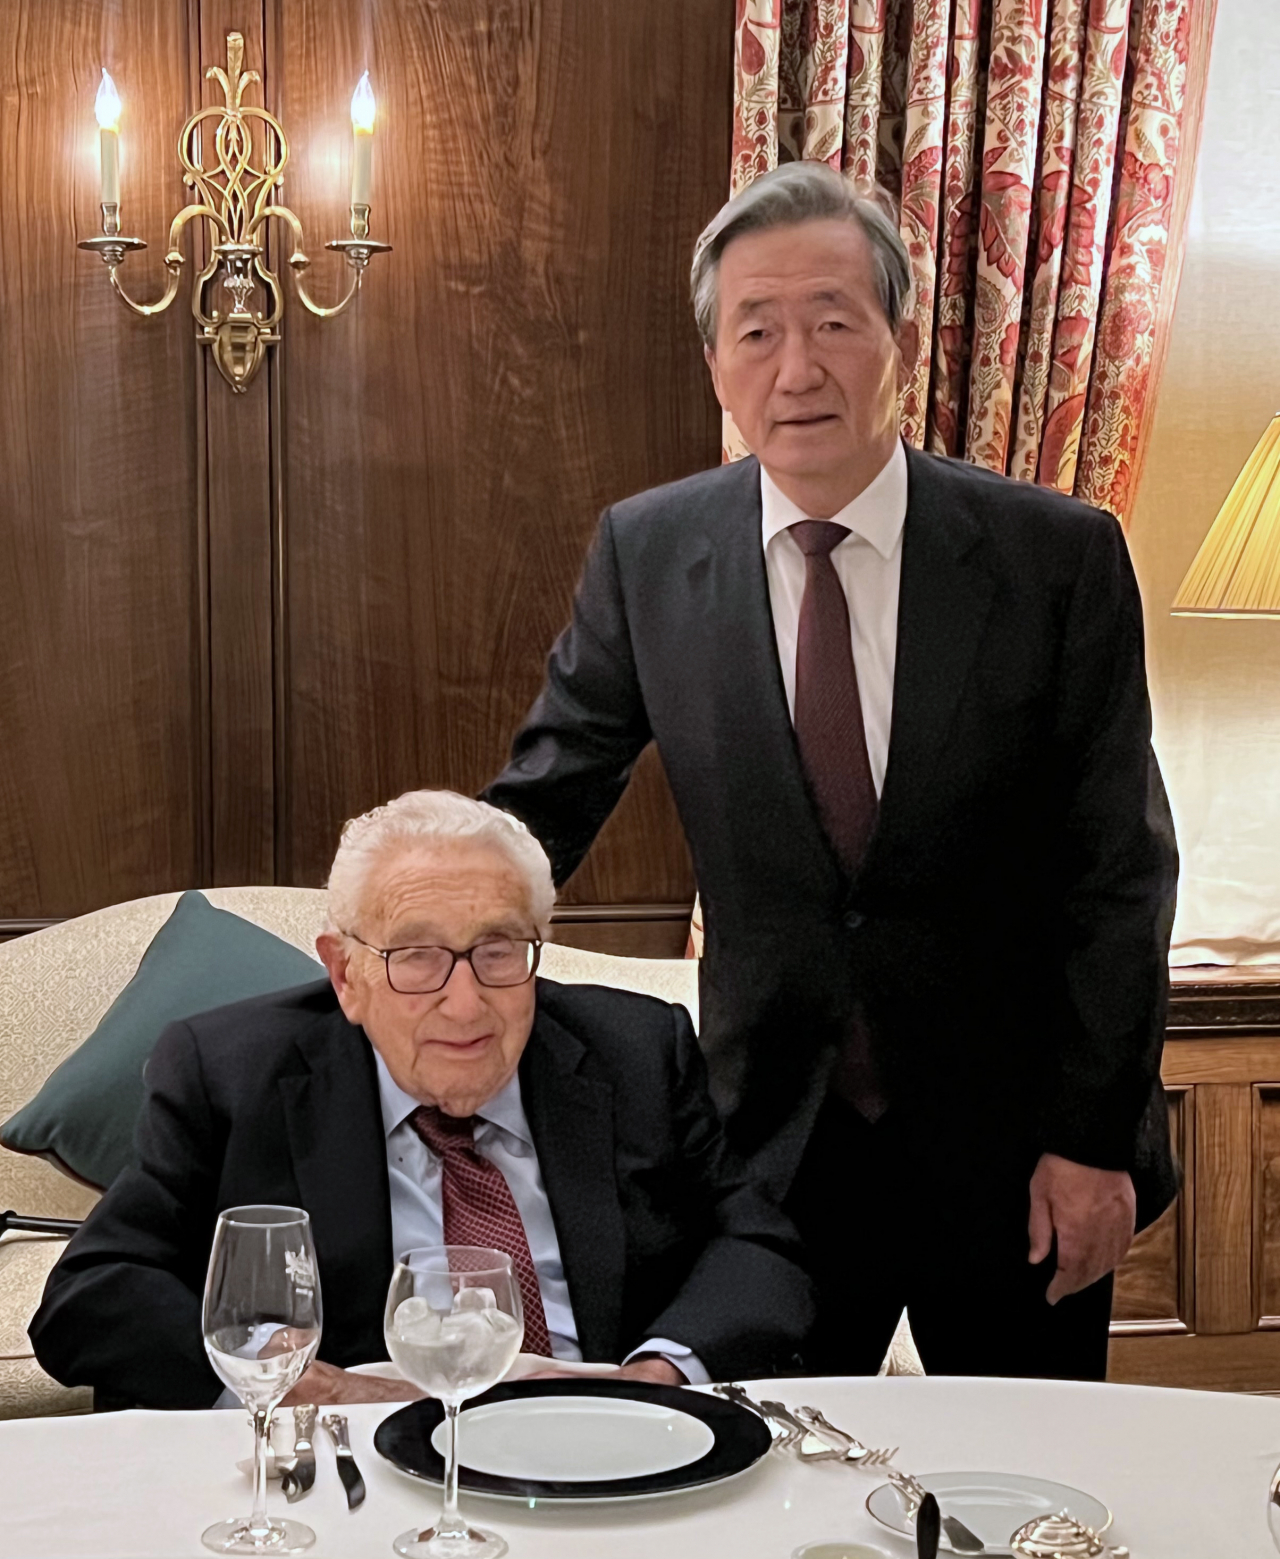 Chung Mong-joon (right), the honorary chairman of the Asan Institute of Policy Studies, and Henry Kissinger pose for a photo during their luncheon in New York on Jan. 5. (Asan Institute of Policy Studies)